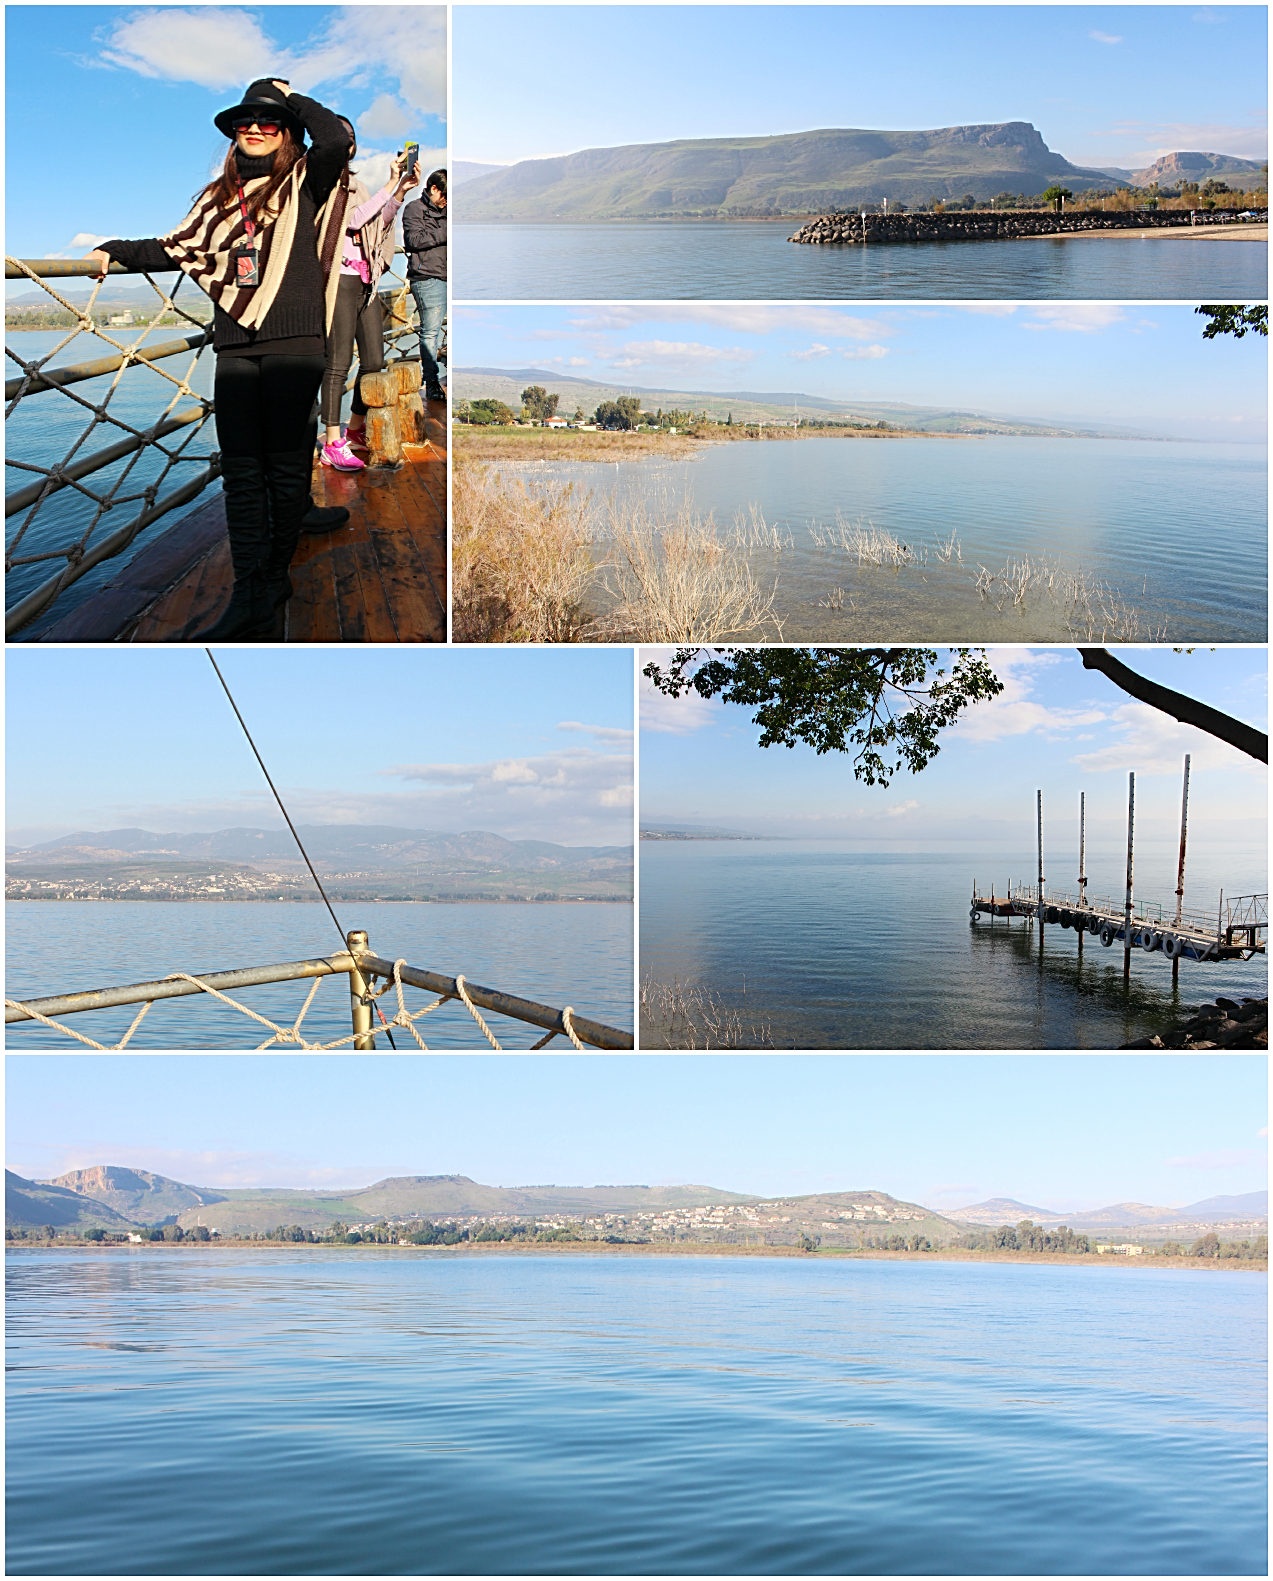 Sea of Galilee: Things To Do in Israel